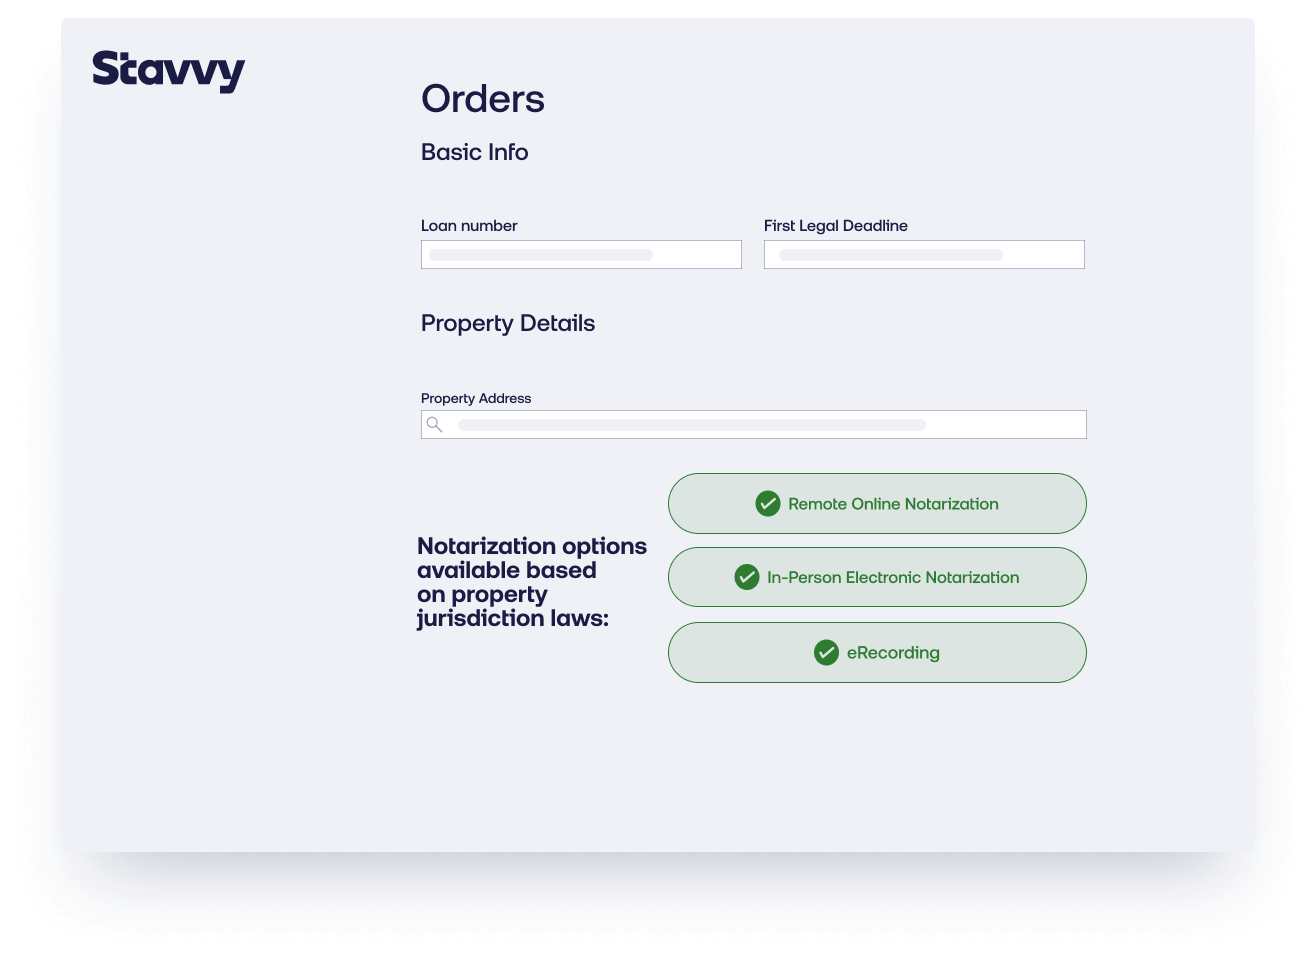 Illustration of creating an order in Stavvy with eligibility engine verification